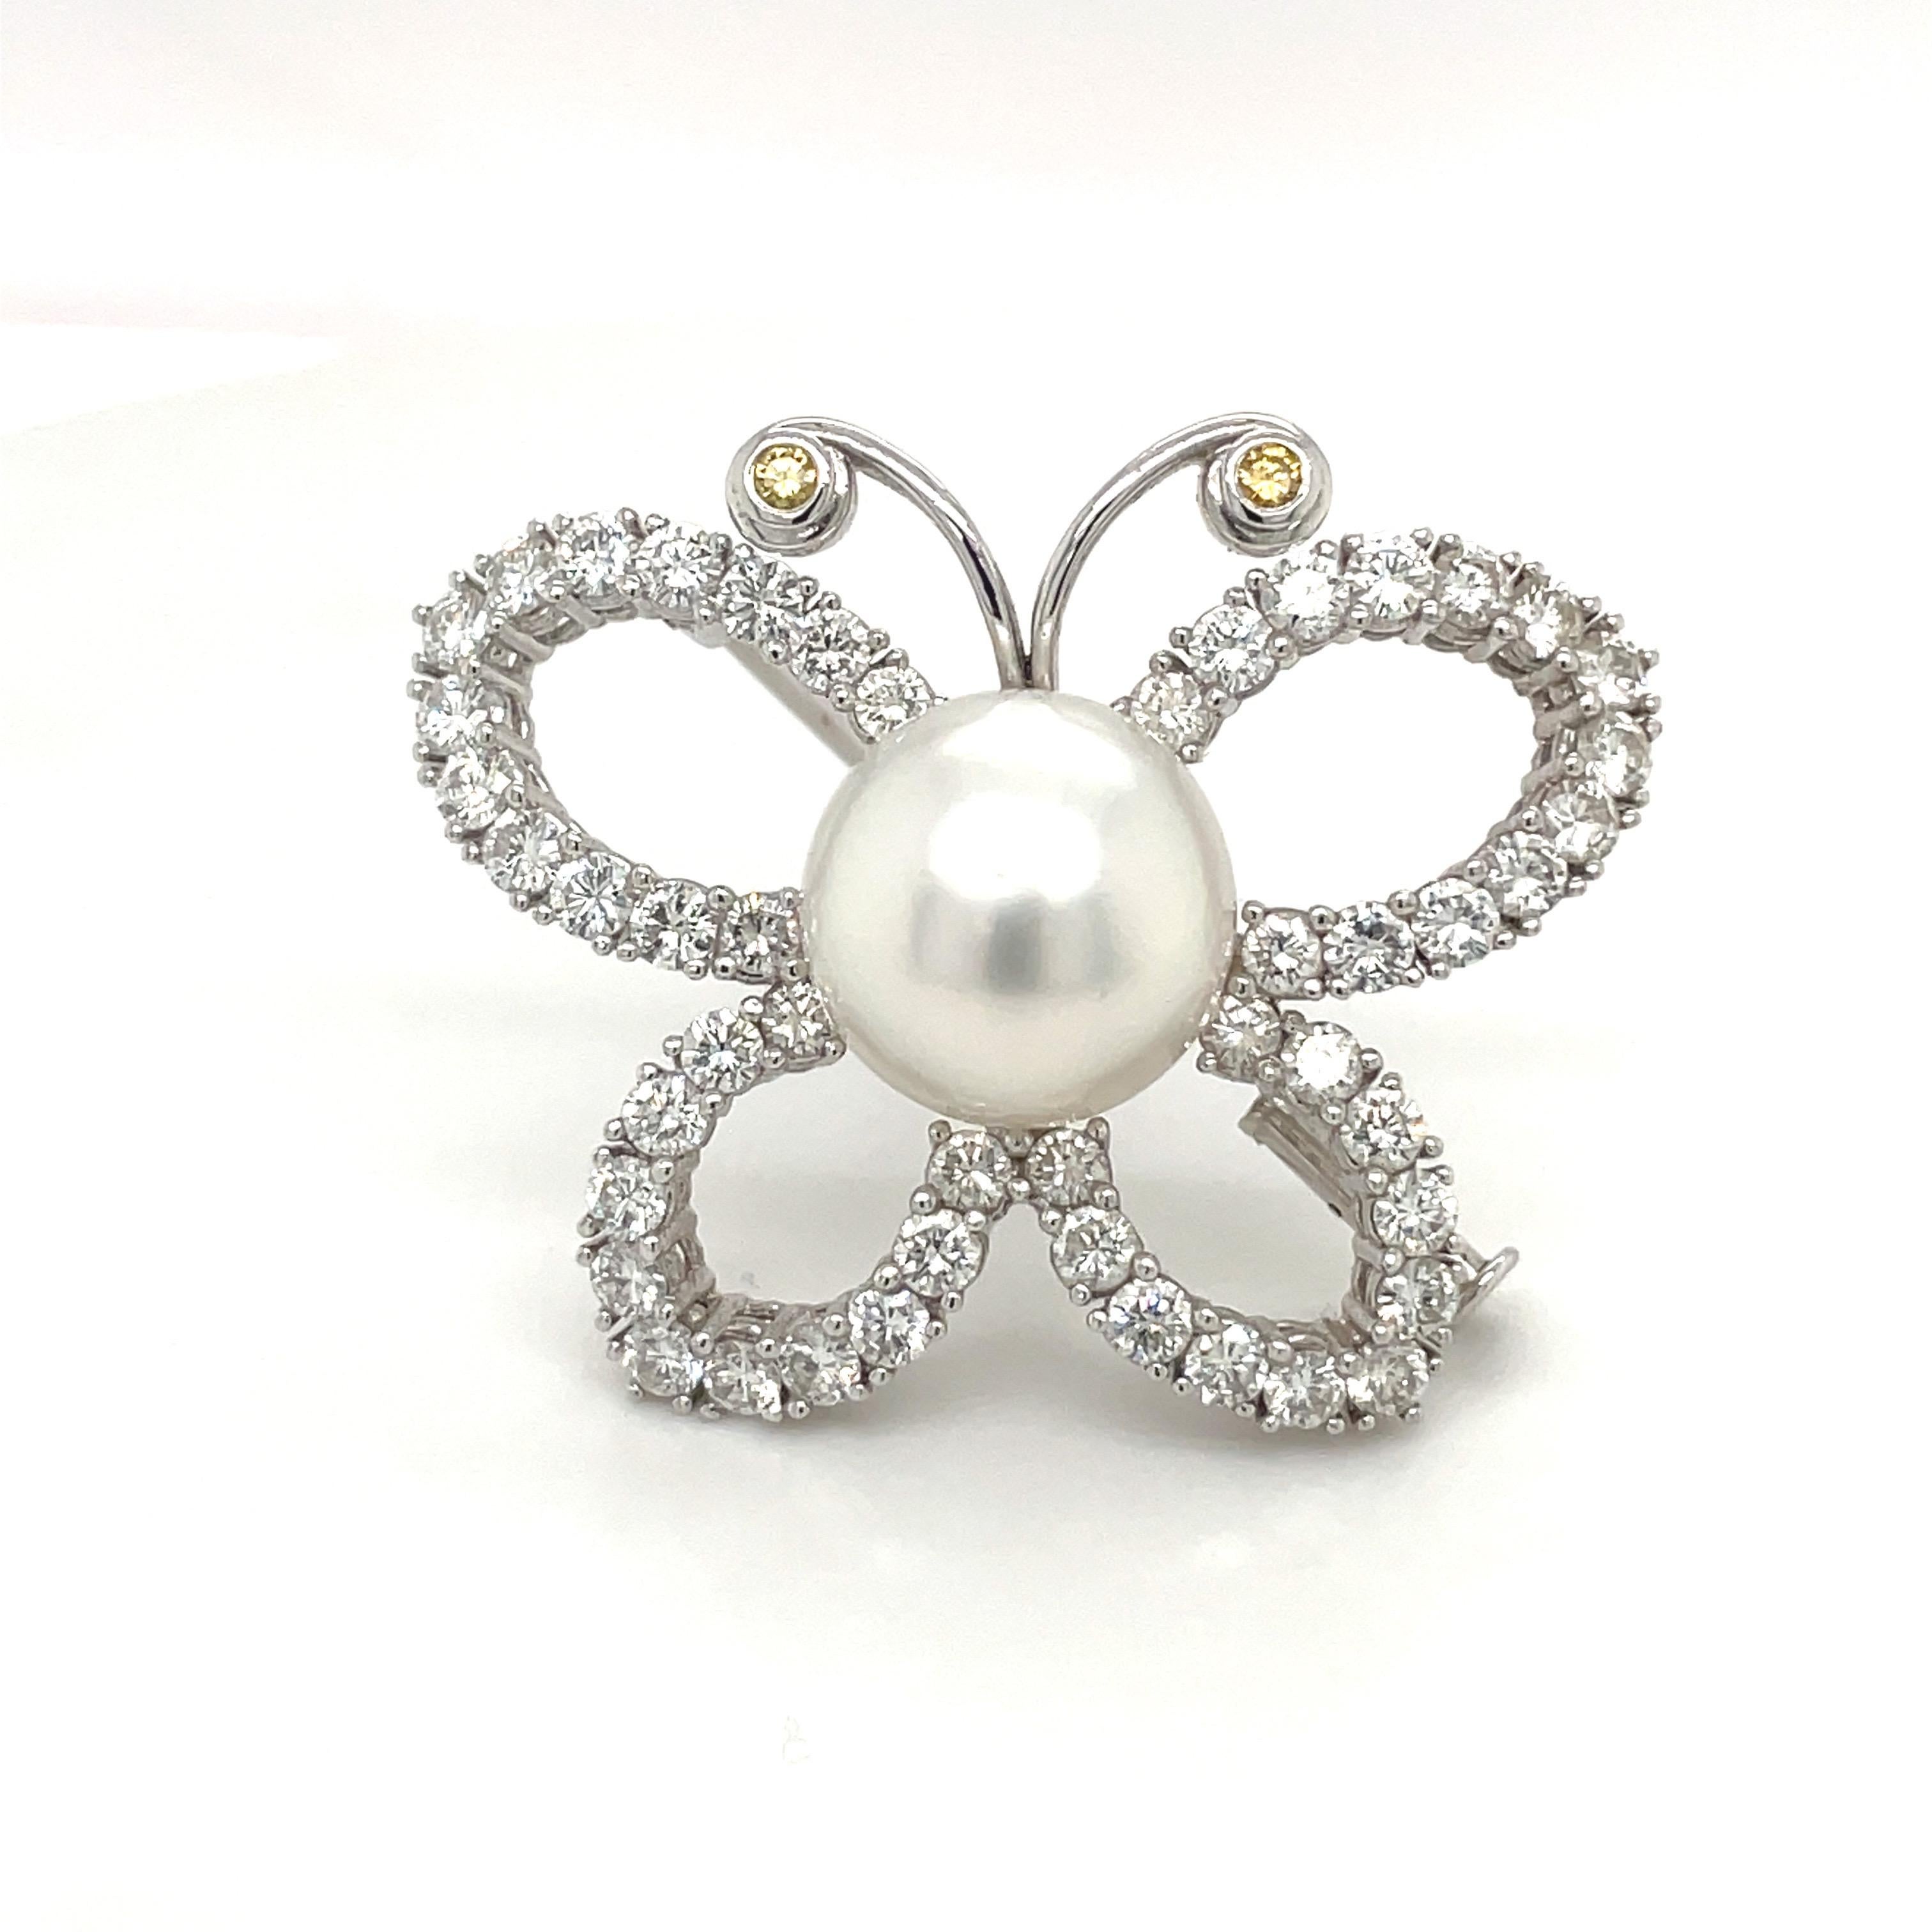 This lovely Butterfly brooch is prong set with round brilliant Diamonds. The 2 antennae have bezel set yellow sapphires. The center of the brooch is a 13 mm South Sea Pearl. The butterfly measures 1.50